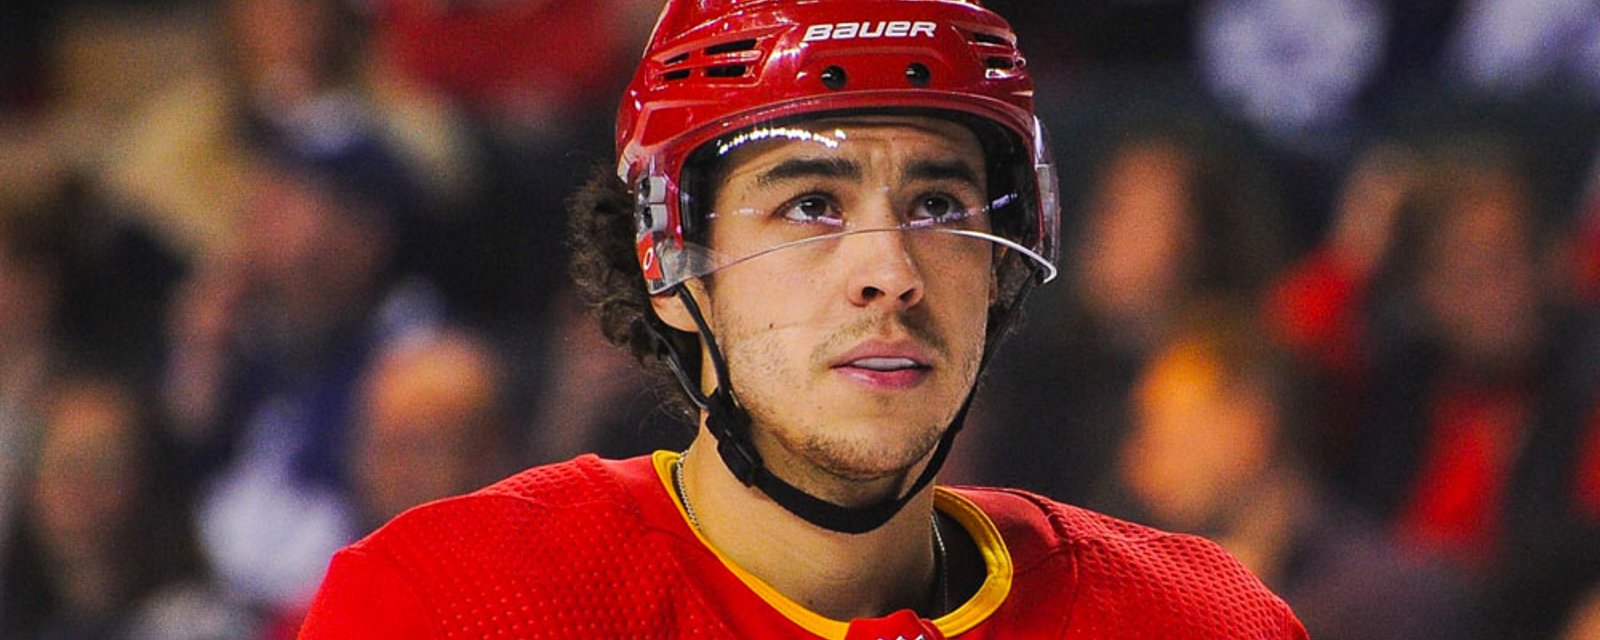 New rumour emerges about Gaudreau and the Flyers